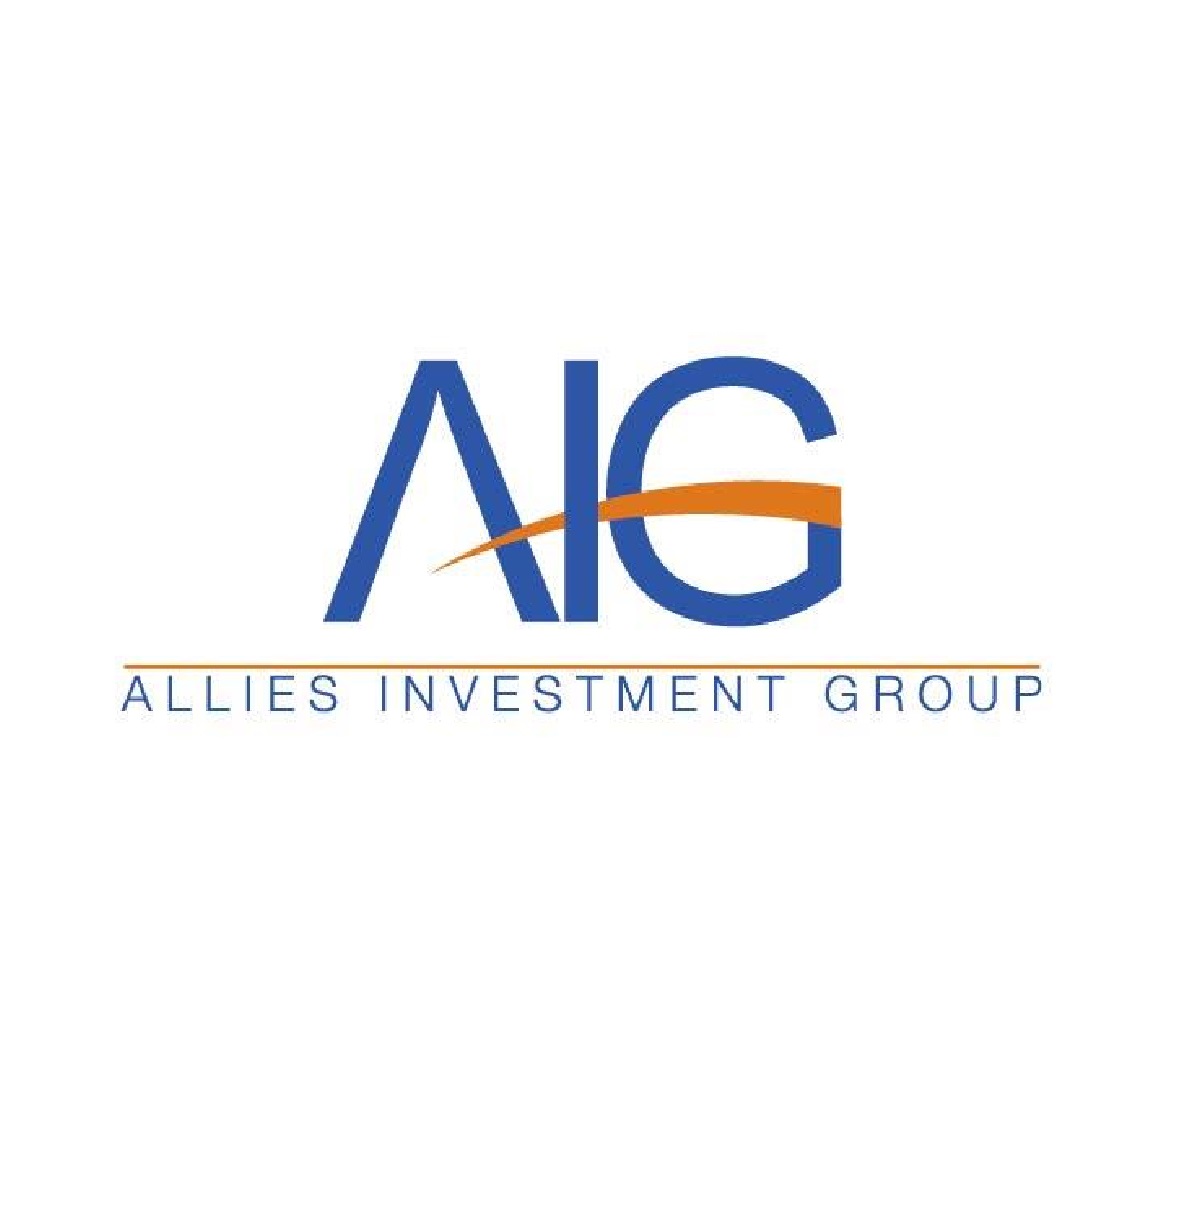 Allies Investment Group